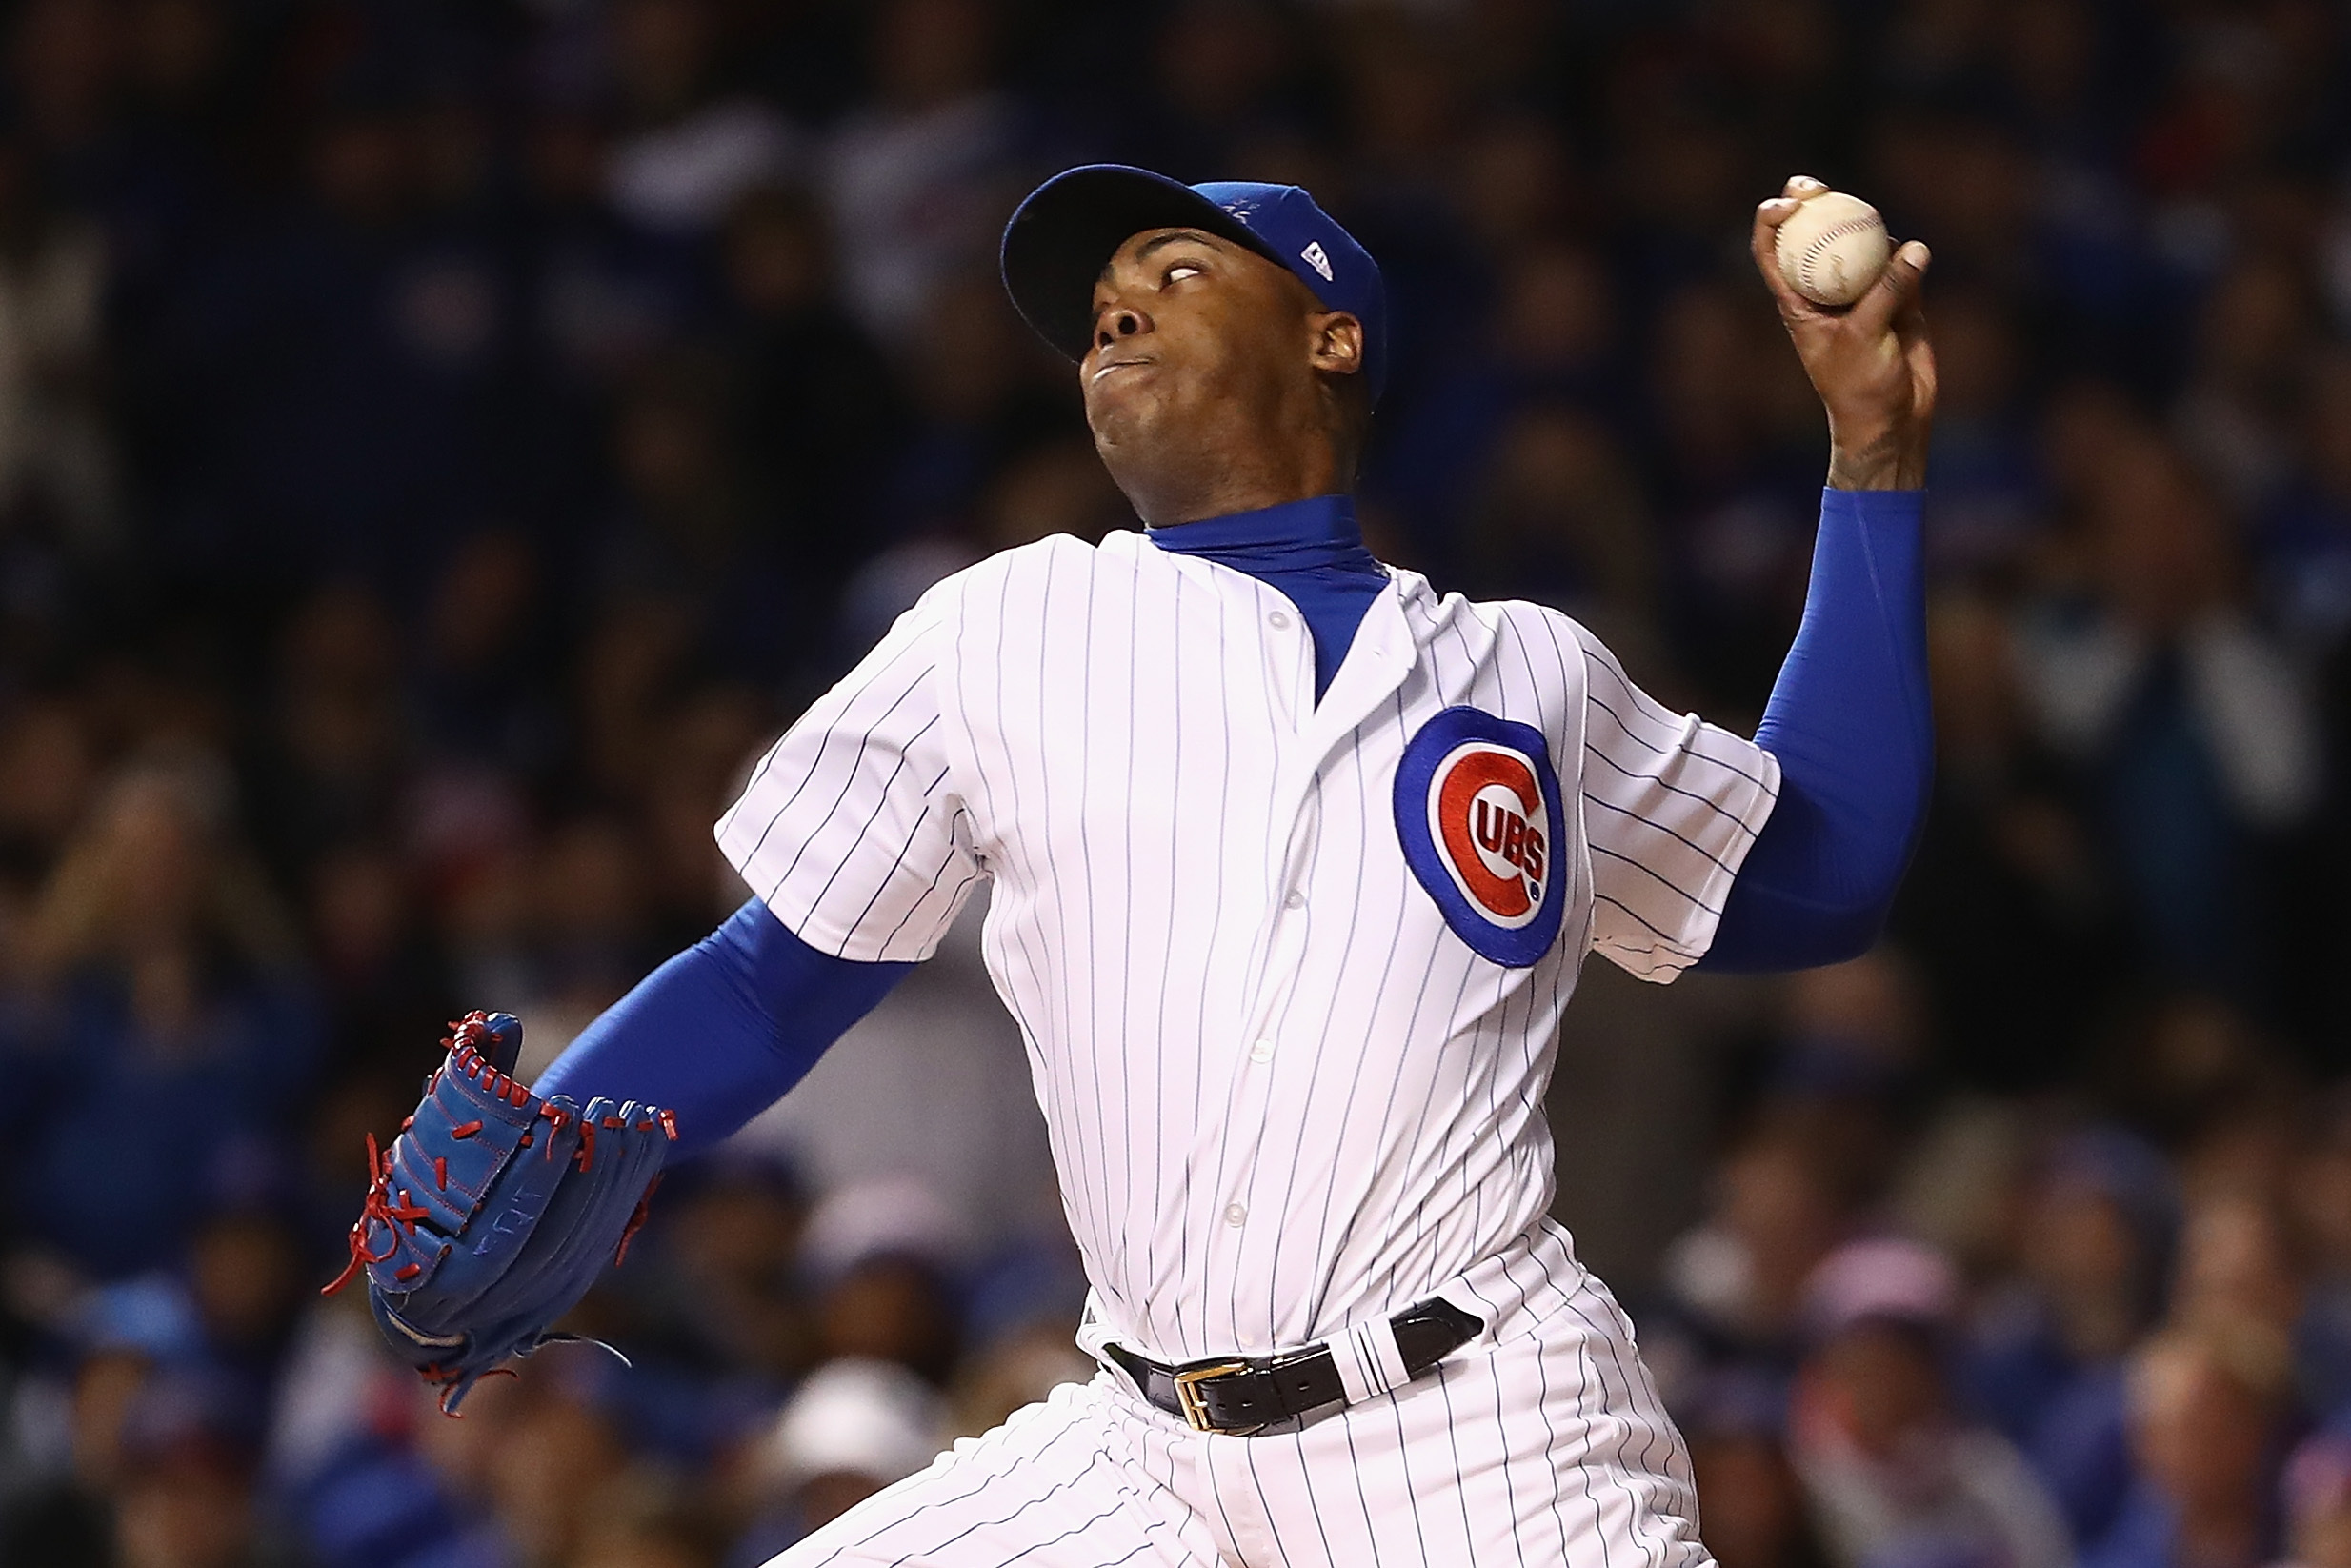 Aroldis Chapman Makes His Mark on World Series with Overpowering